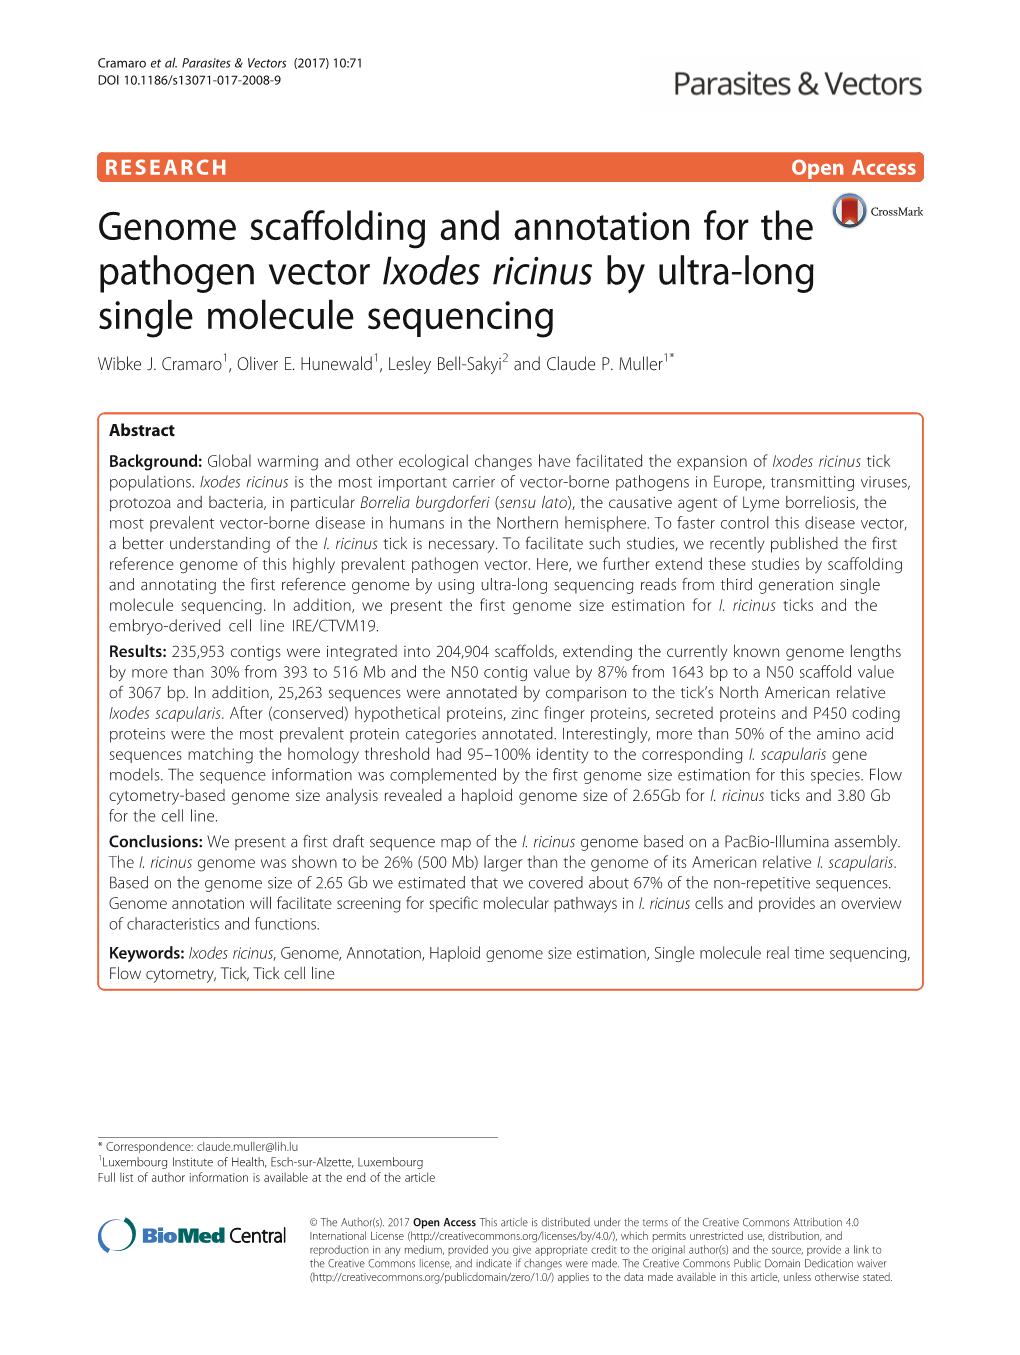 Genome Scaffolding and Annotation for the Pathogen Vector Ixodes Ricinus by Ultra-Long Single Molecule Sequencing Wibke J